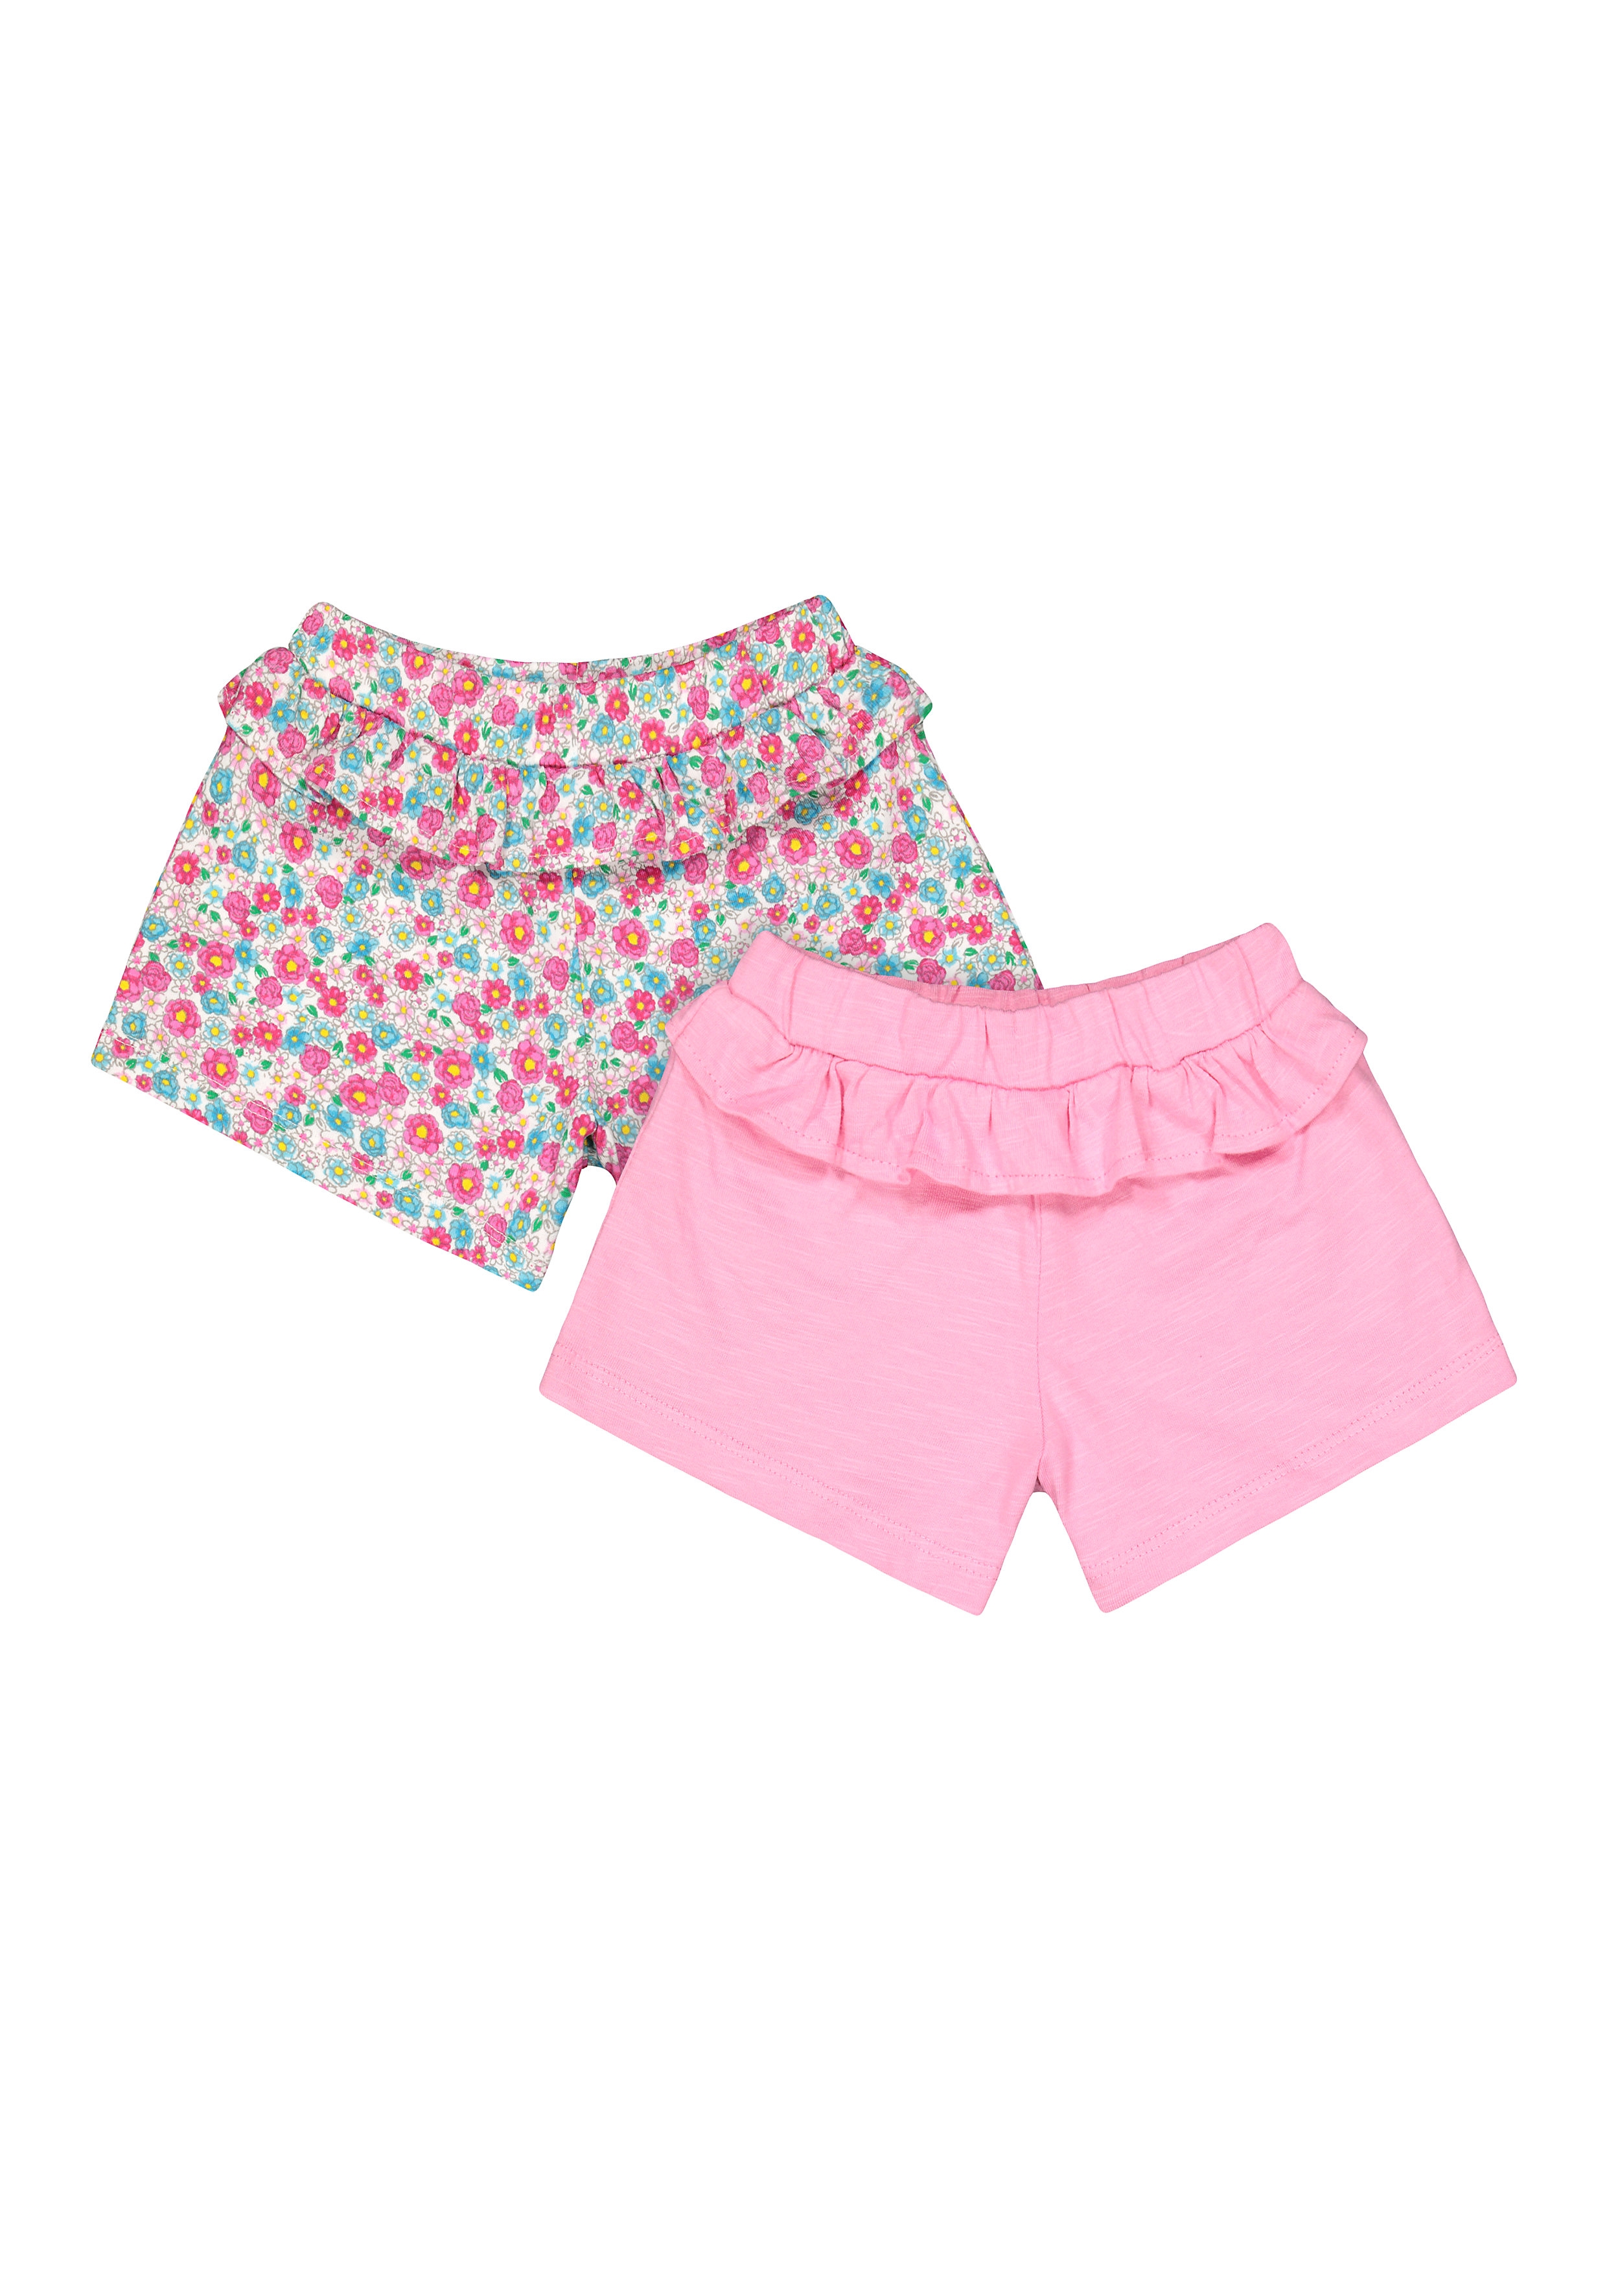 Pink and Floral Shorts - 2 Pack